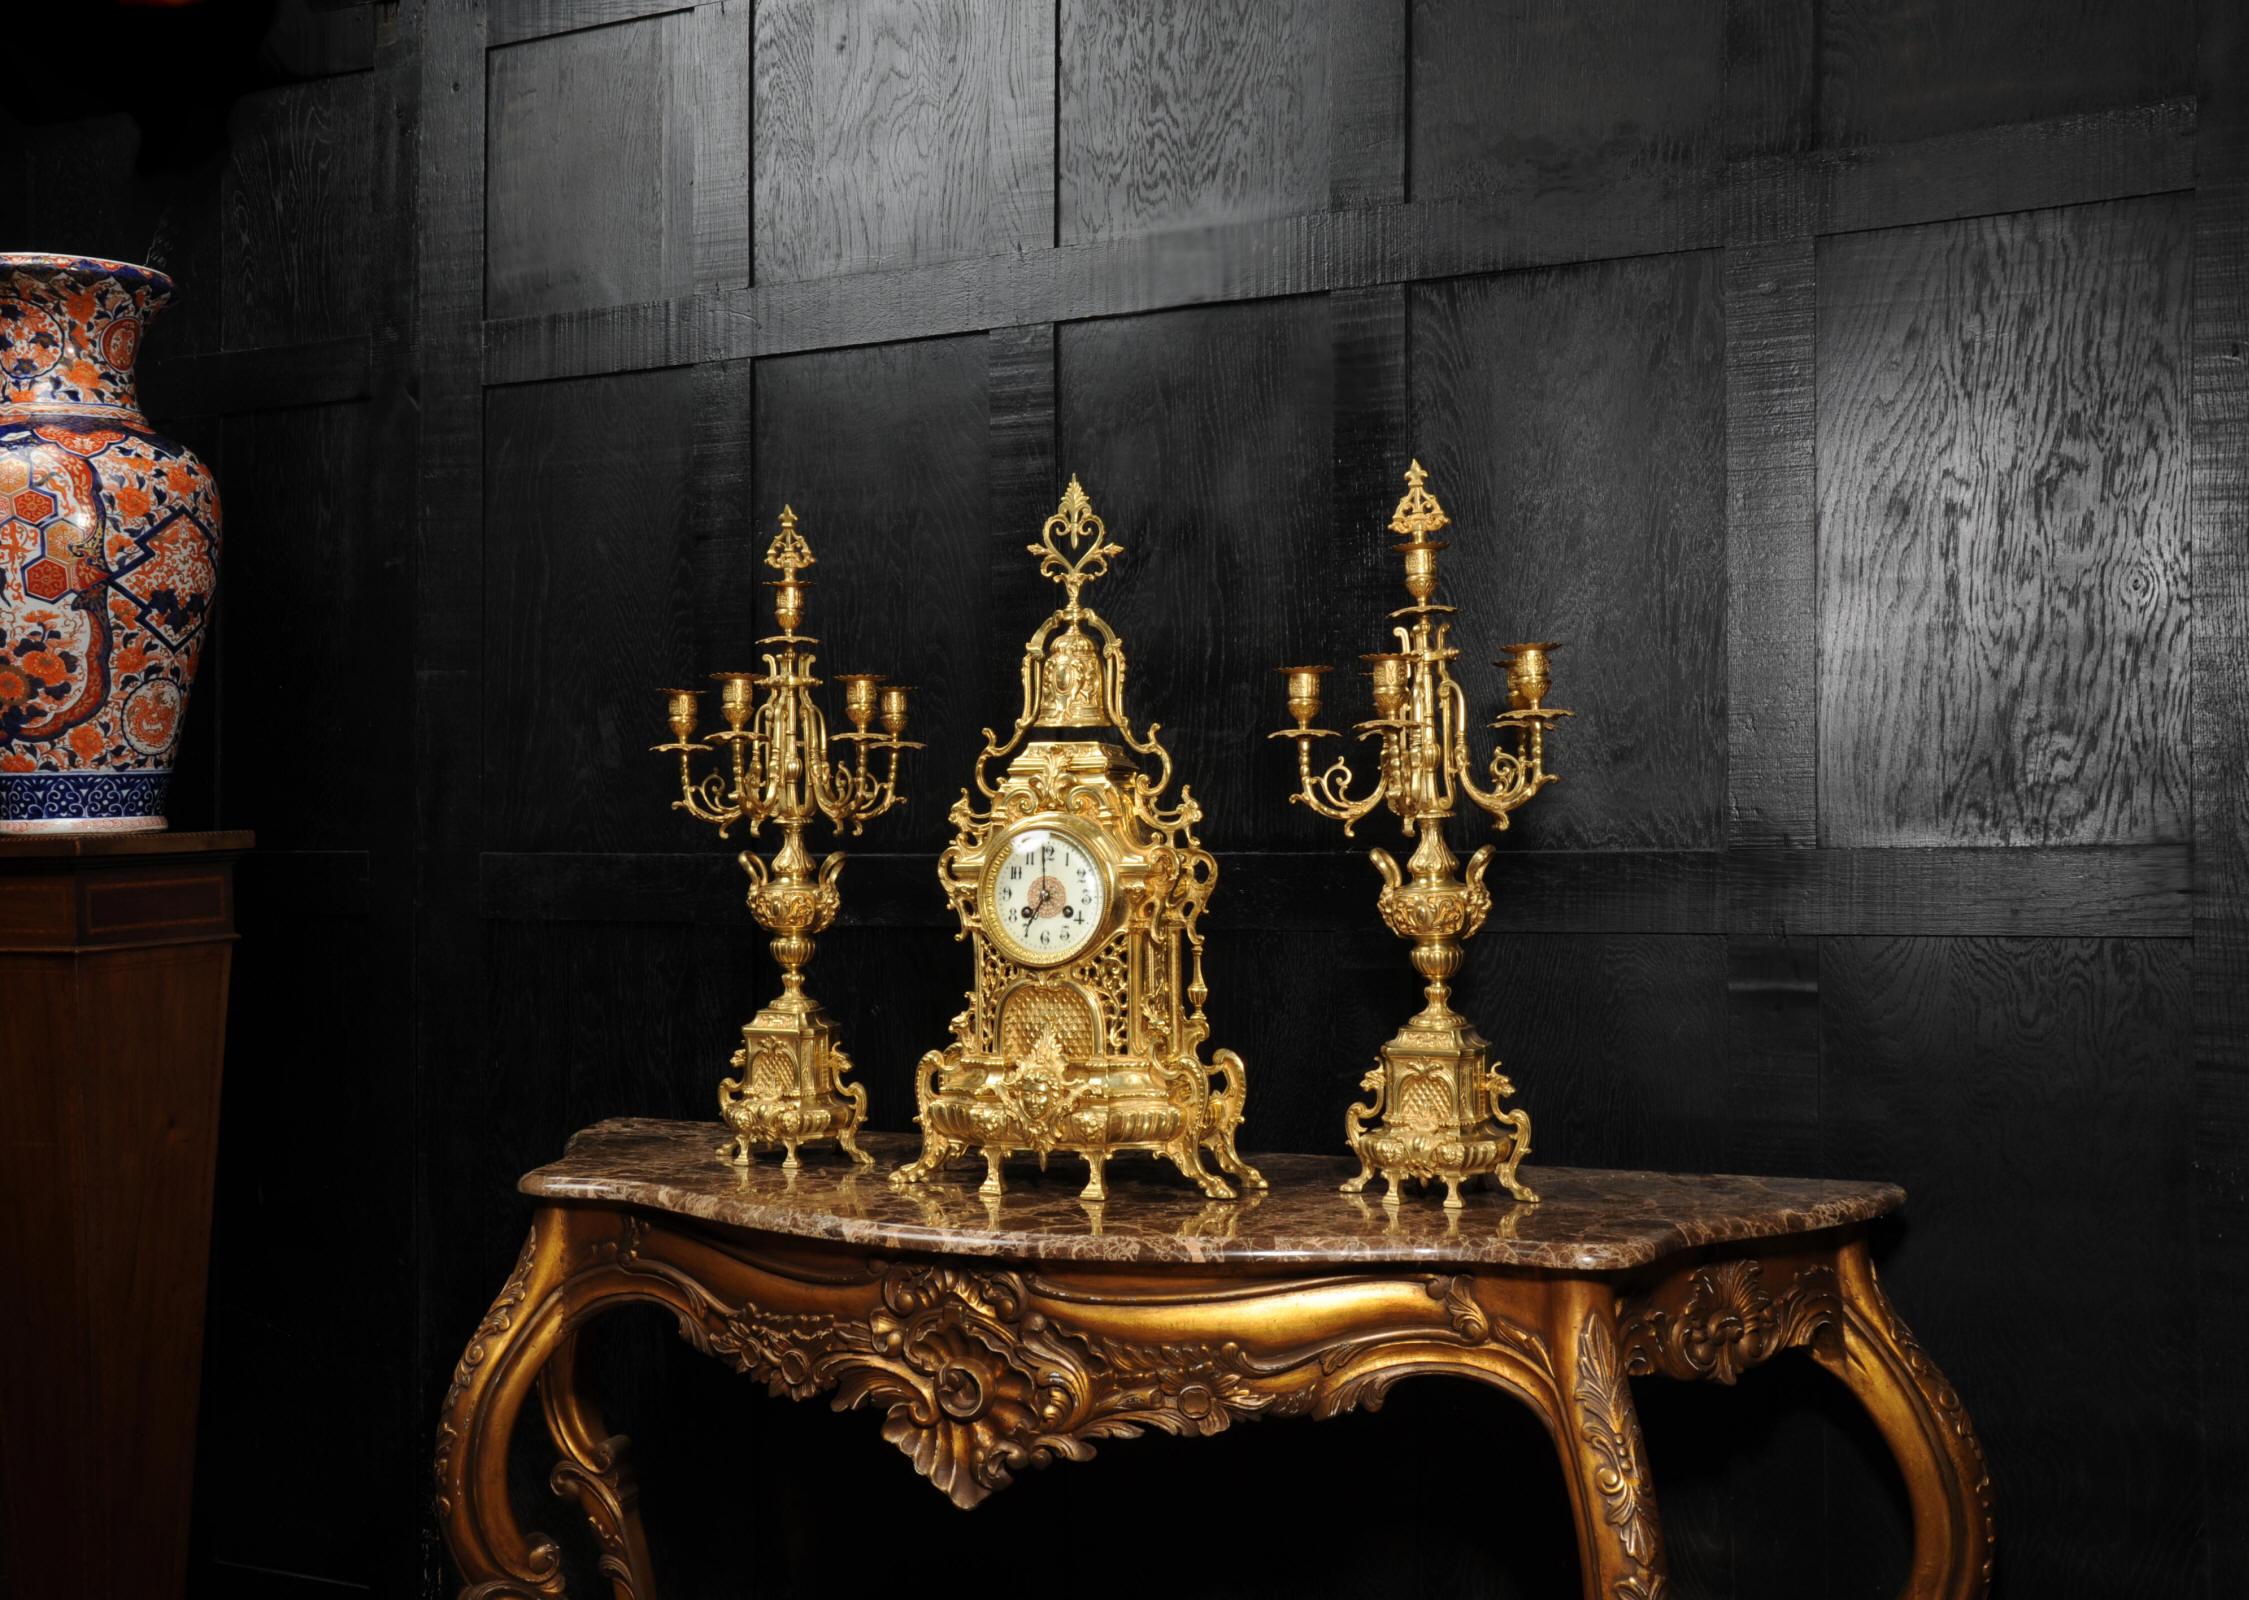 19th Century Large Antique French Baroque Gilt Bronze Clock Set by Japy Freres